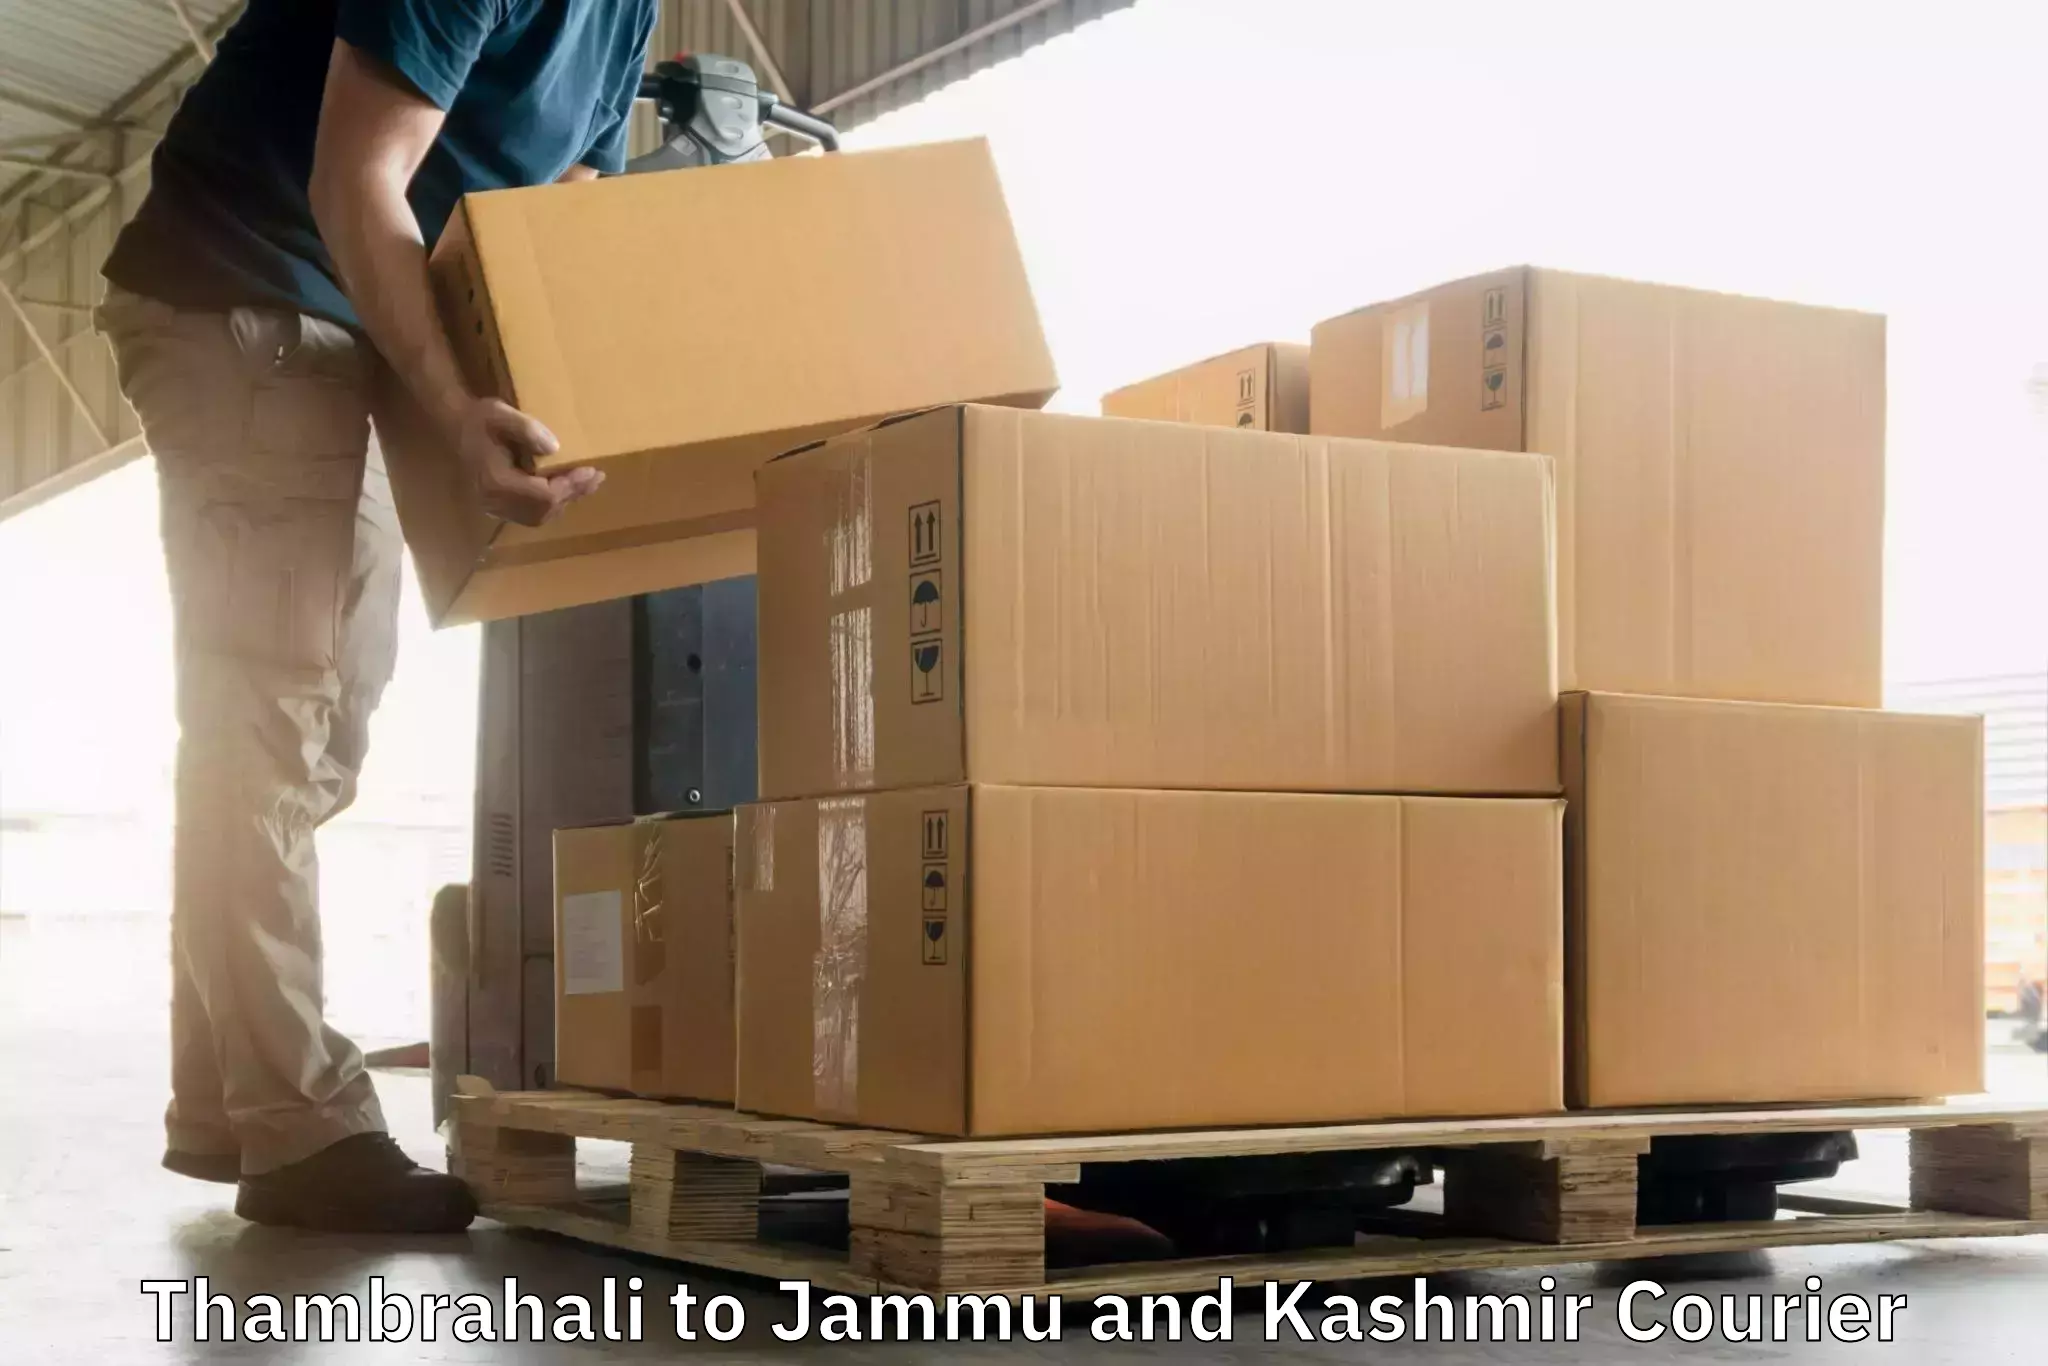 Multi-service courier options Thambrahali to Jammu and Kashmir